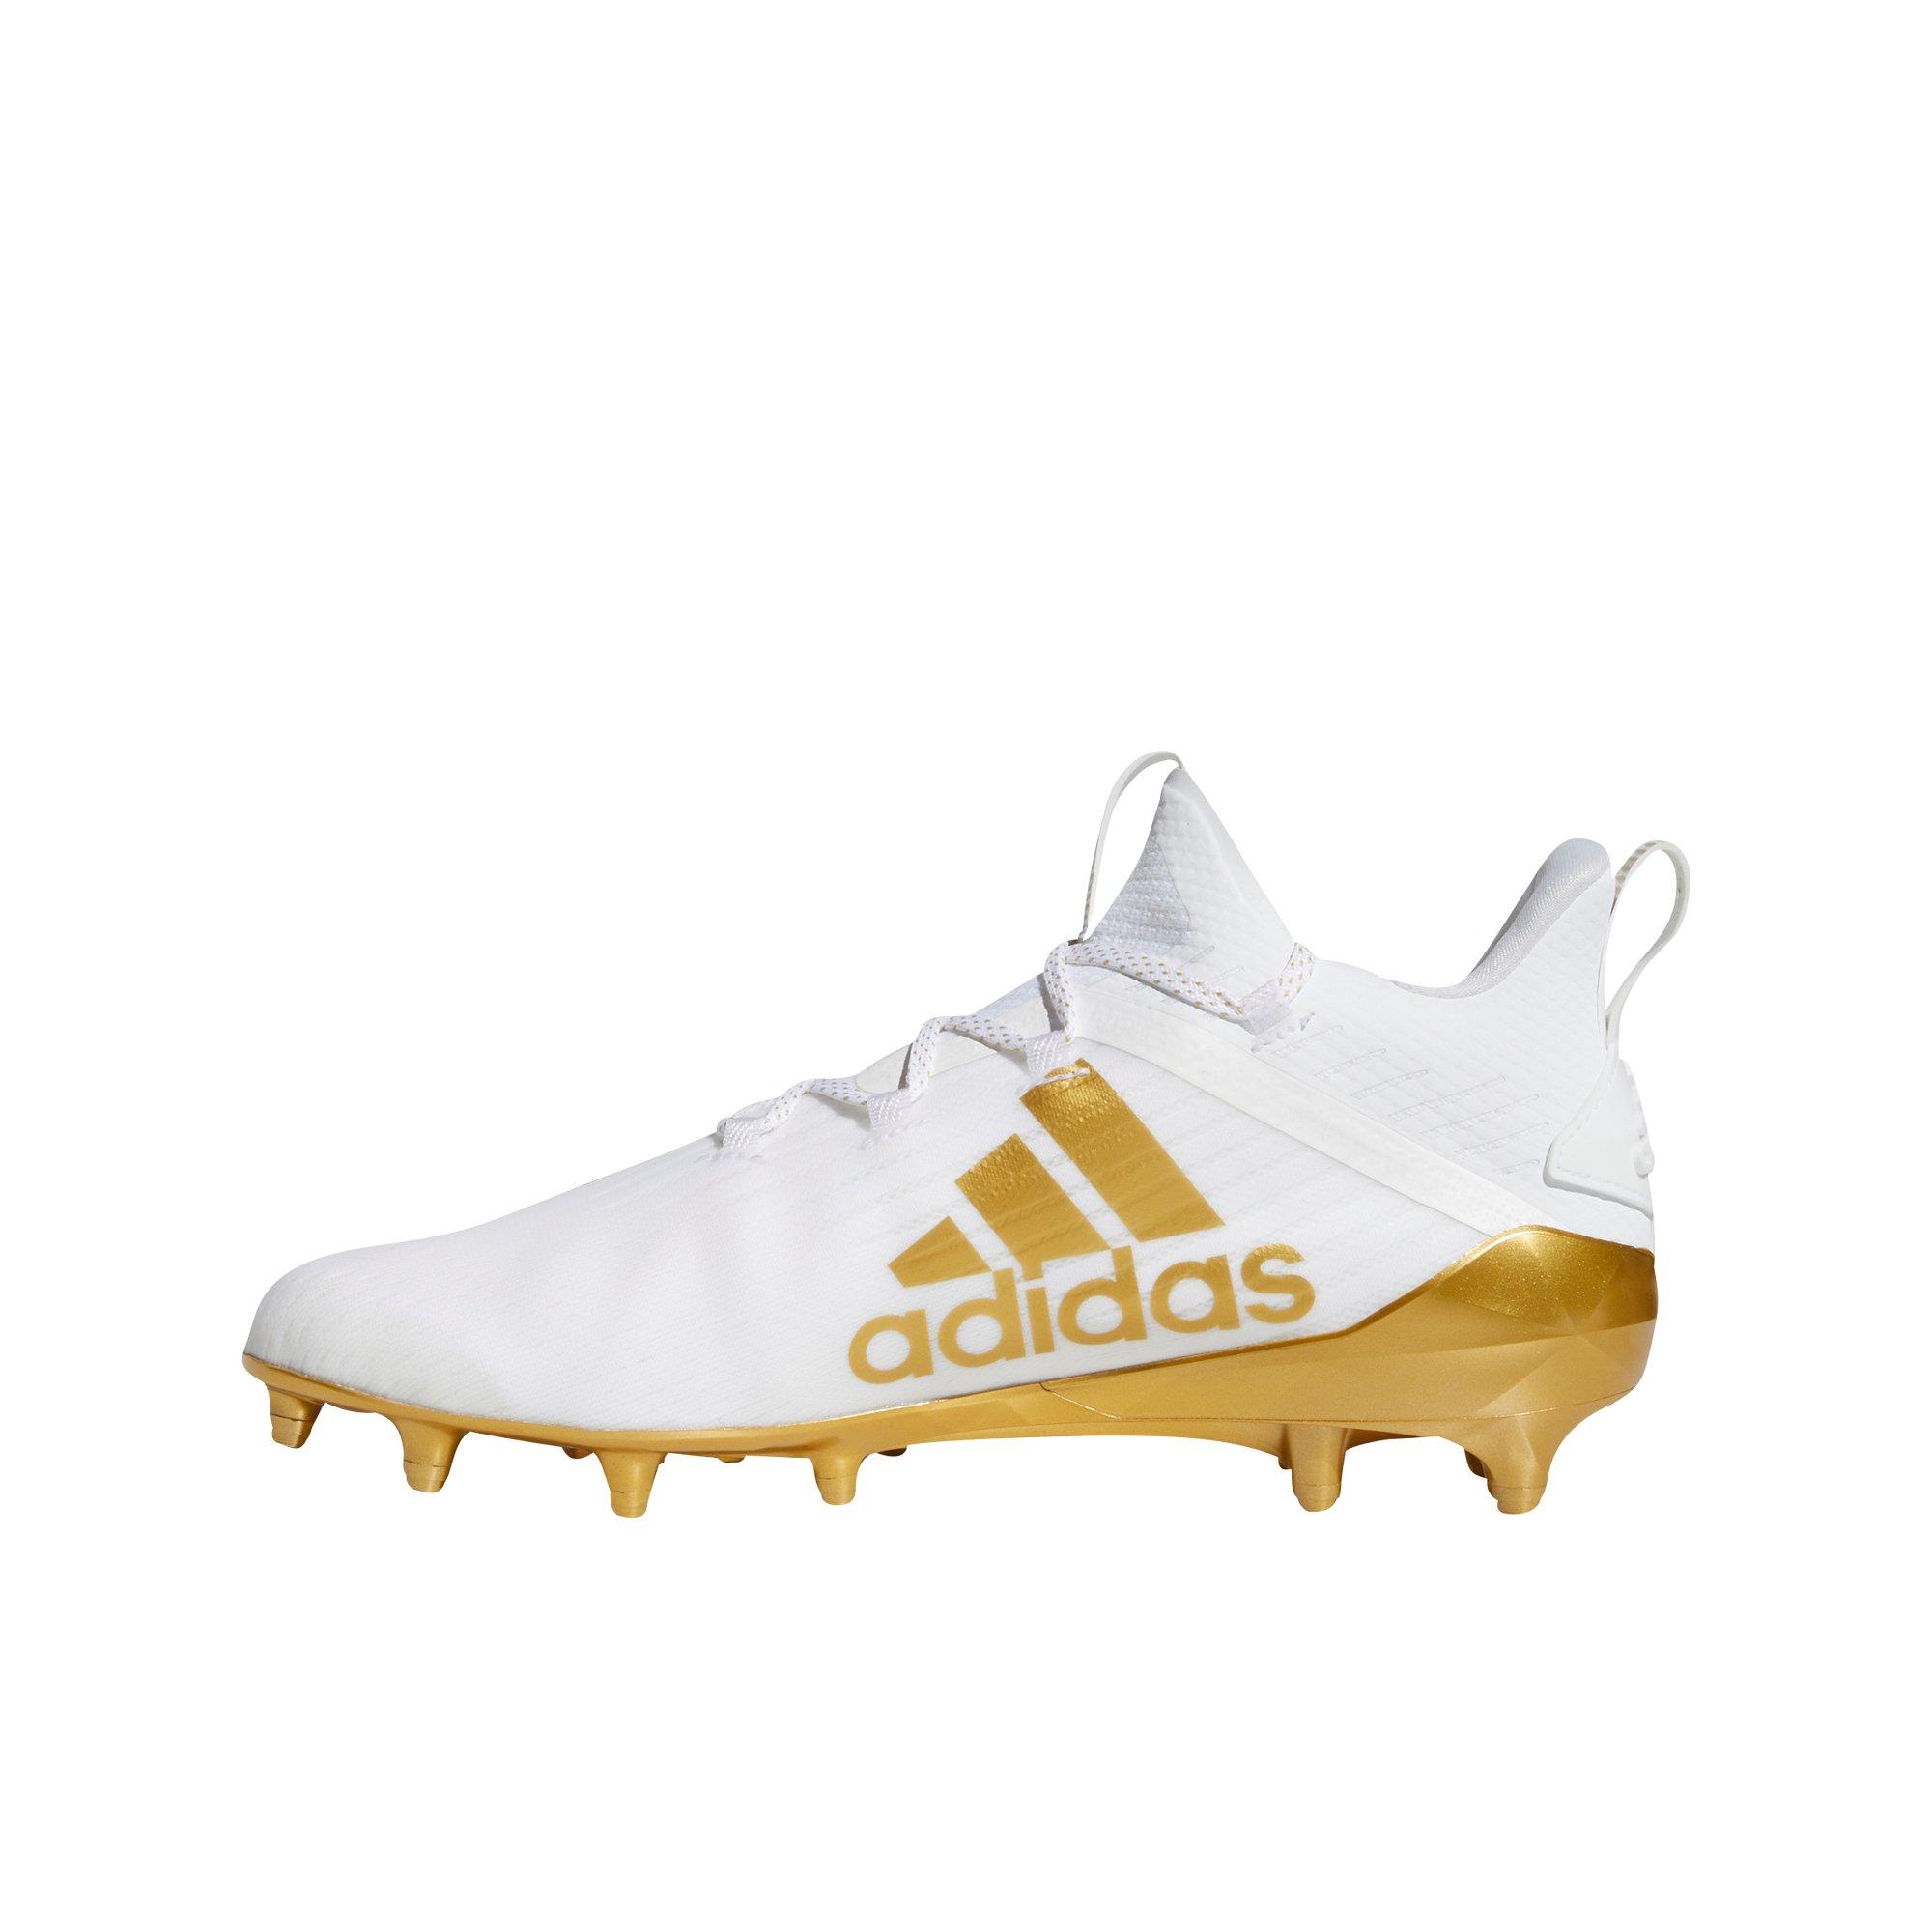 adidas soccer cleats white and gold